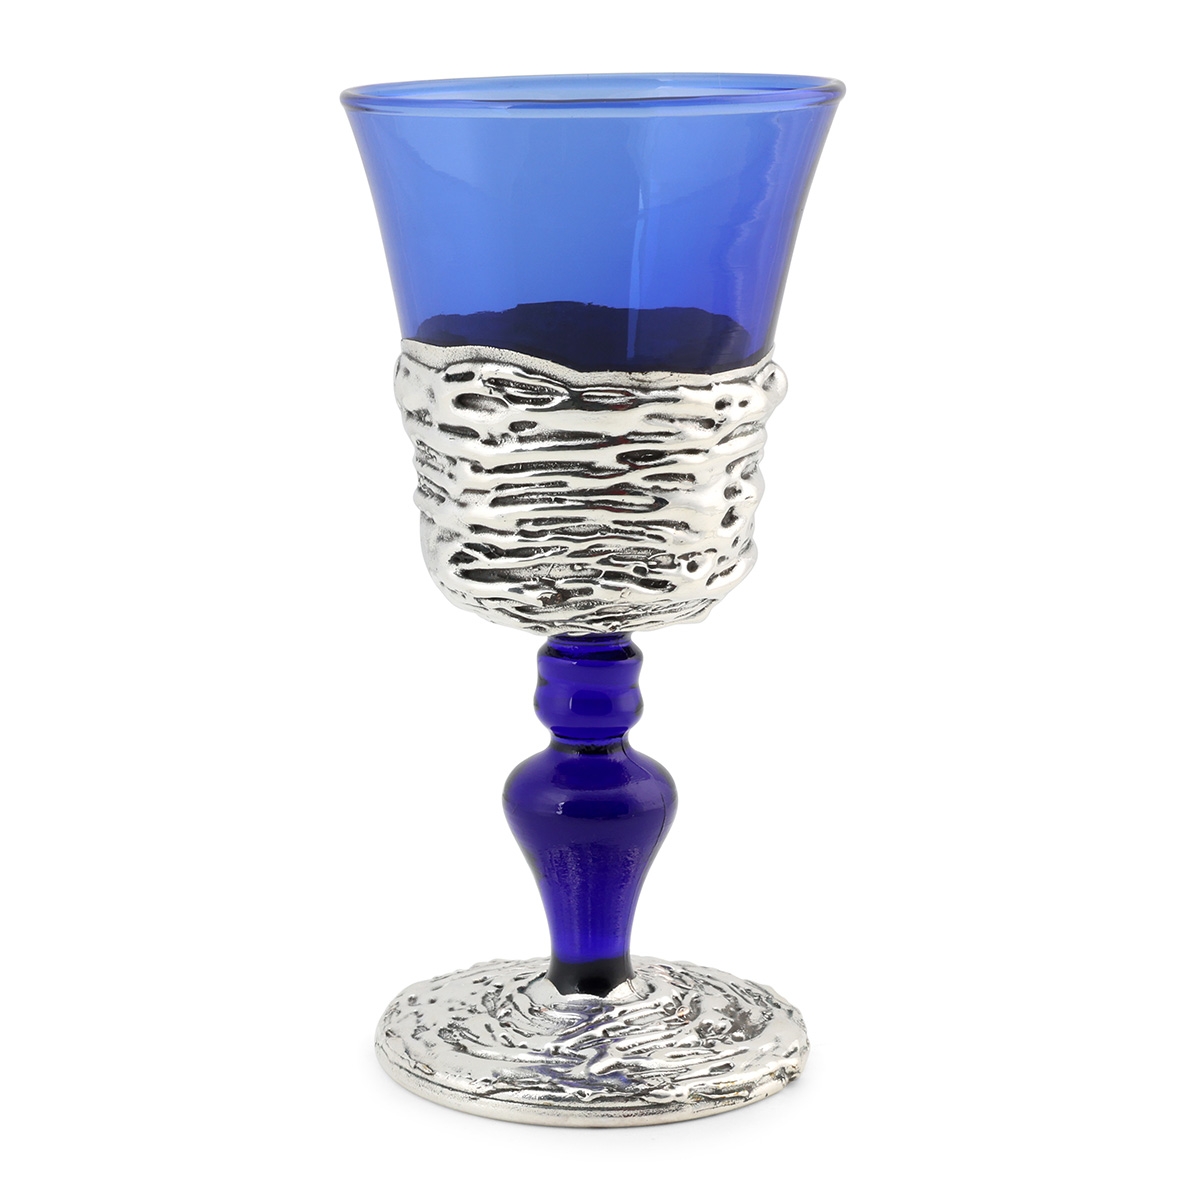 Handmade Sterling Silver and Blue Glass Kiddush Cup - 1